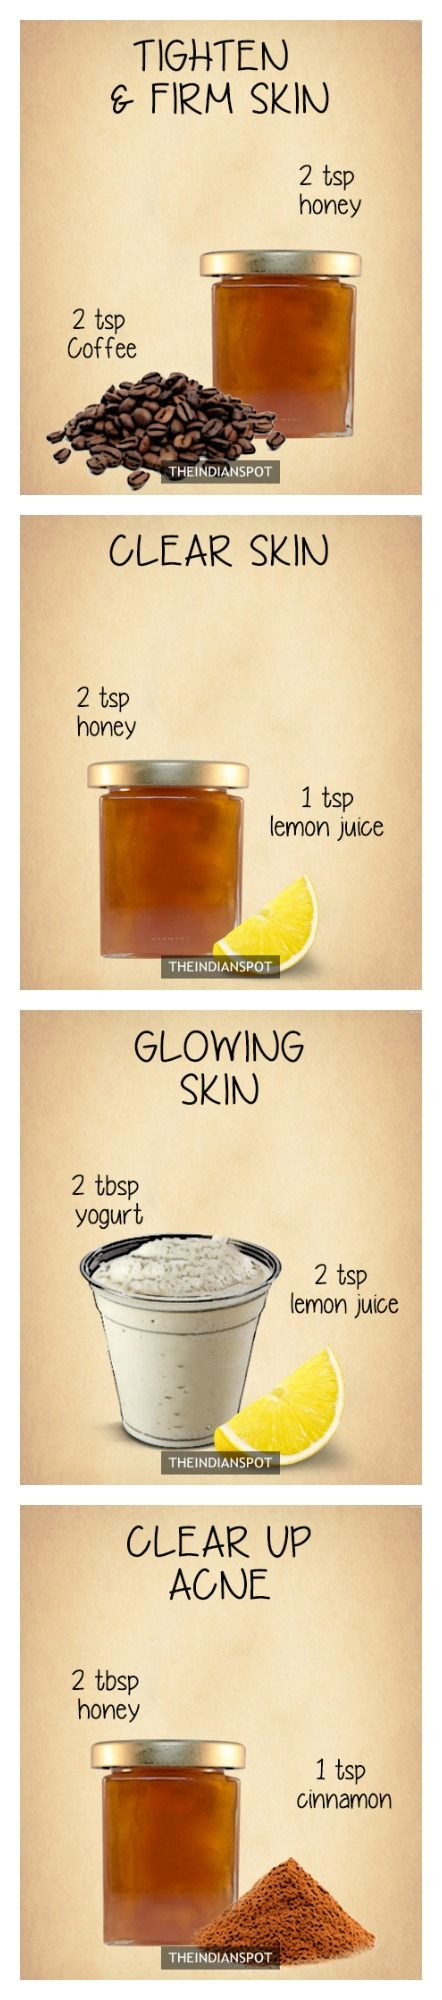 Good Face Masks DIY
 Goal To try these out the ones that I need all of them